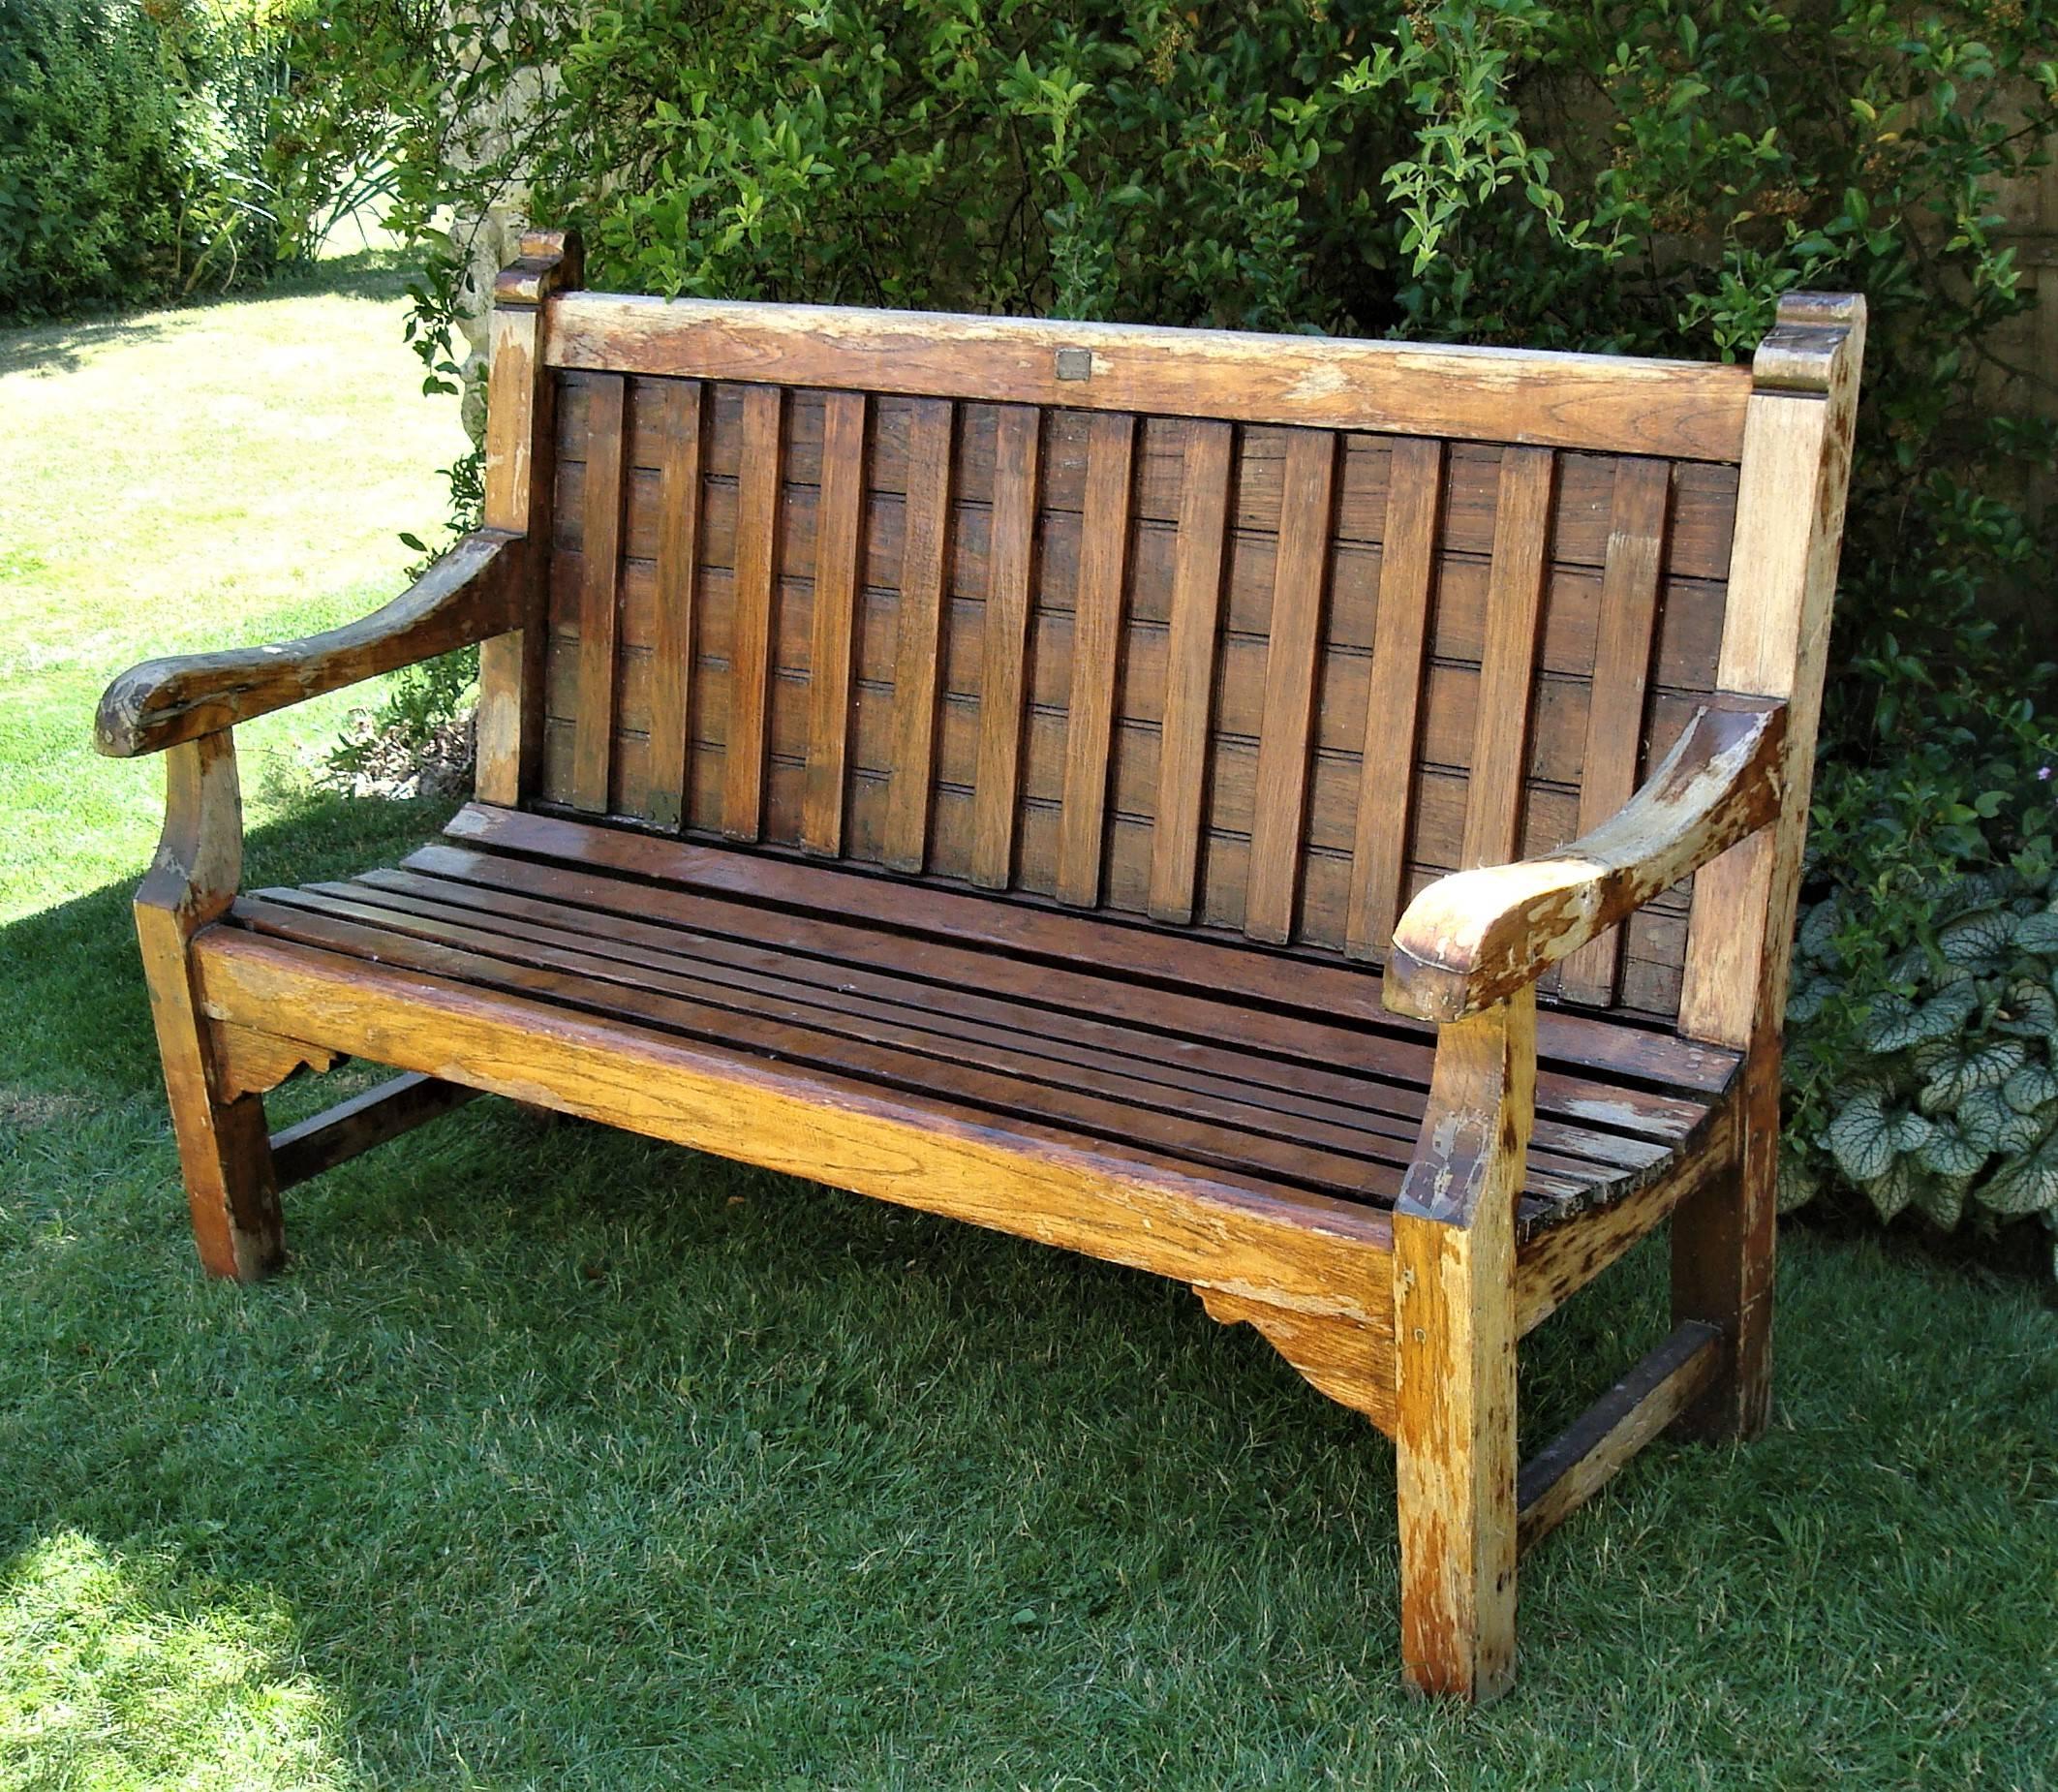 Early 20th Century Teak Ship's Bench from HMS Defiance In Good Condition For Sale In Moreton-in-Marsh, Gloucestershire